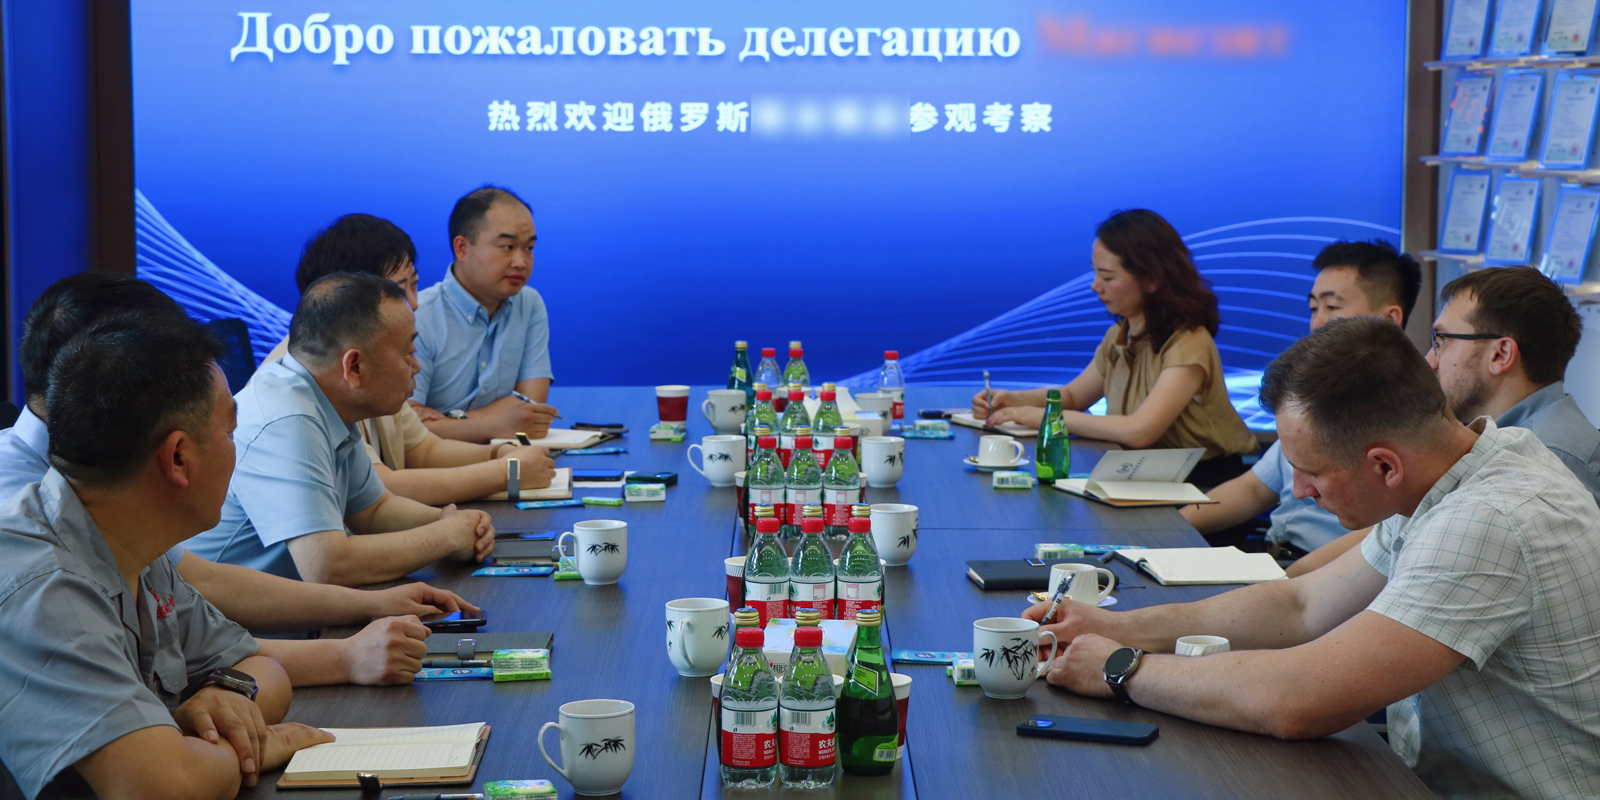 Russian Customers Determined Cooperation Intention with Kerui